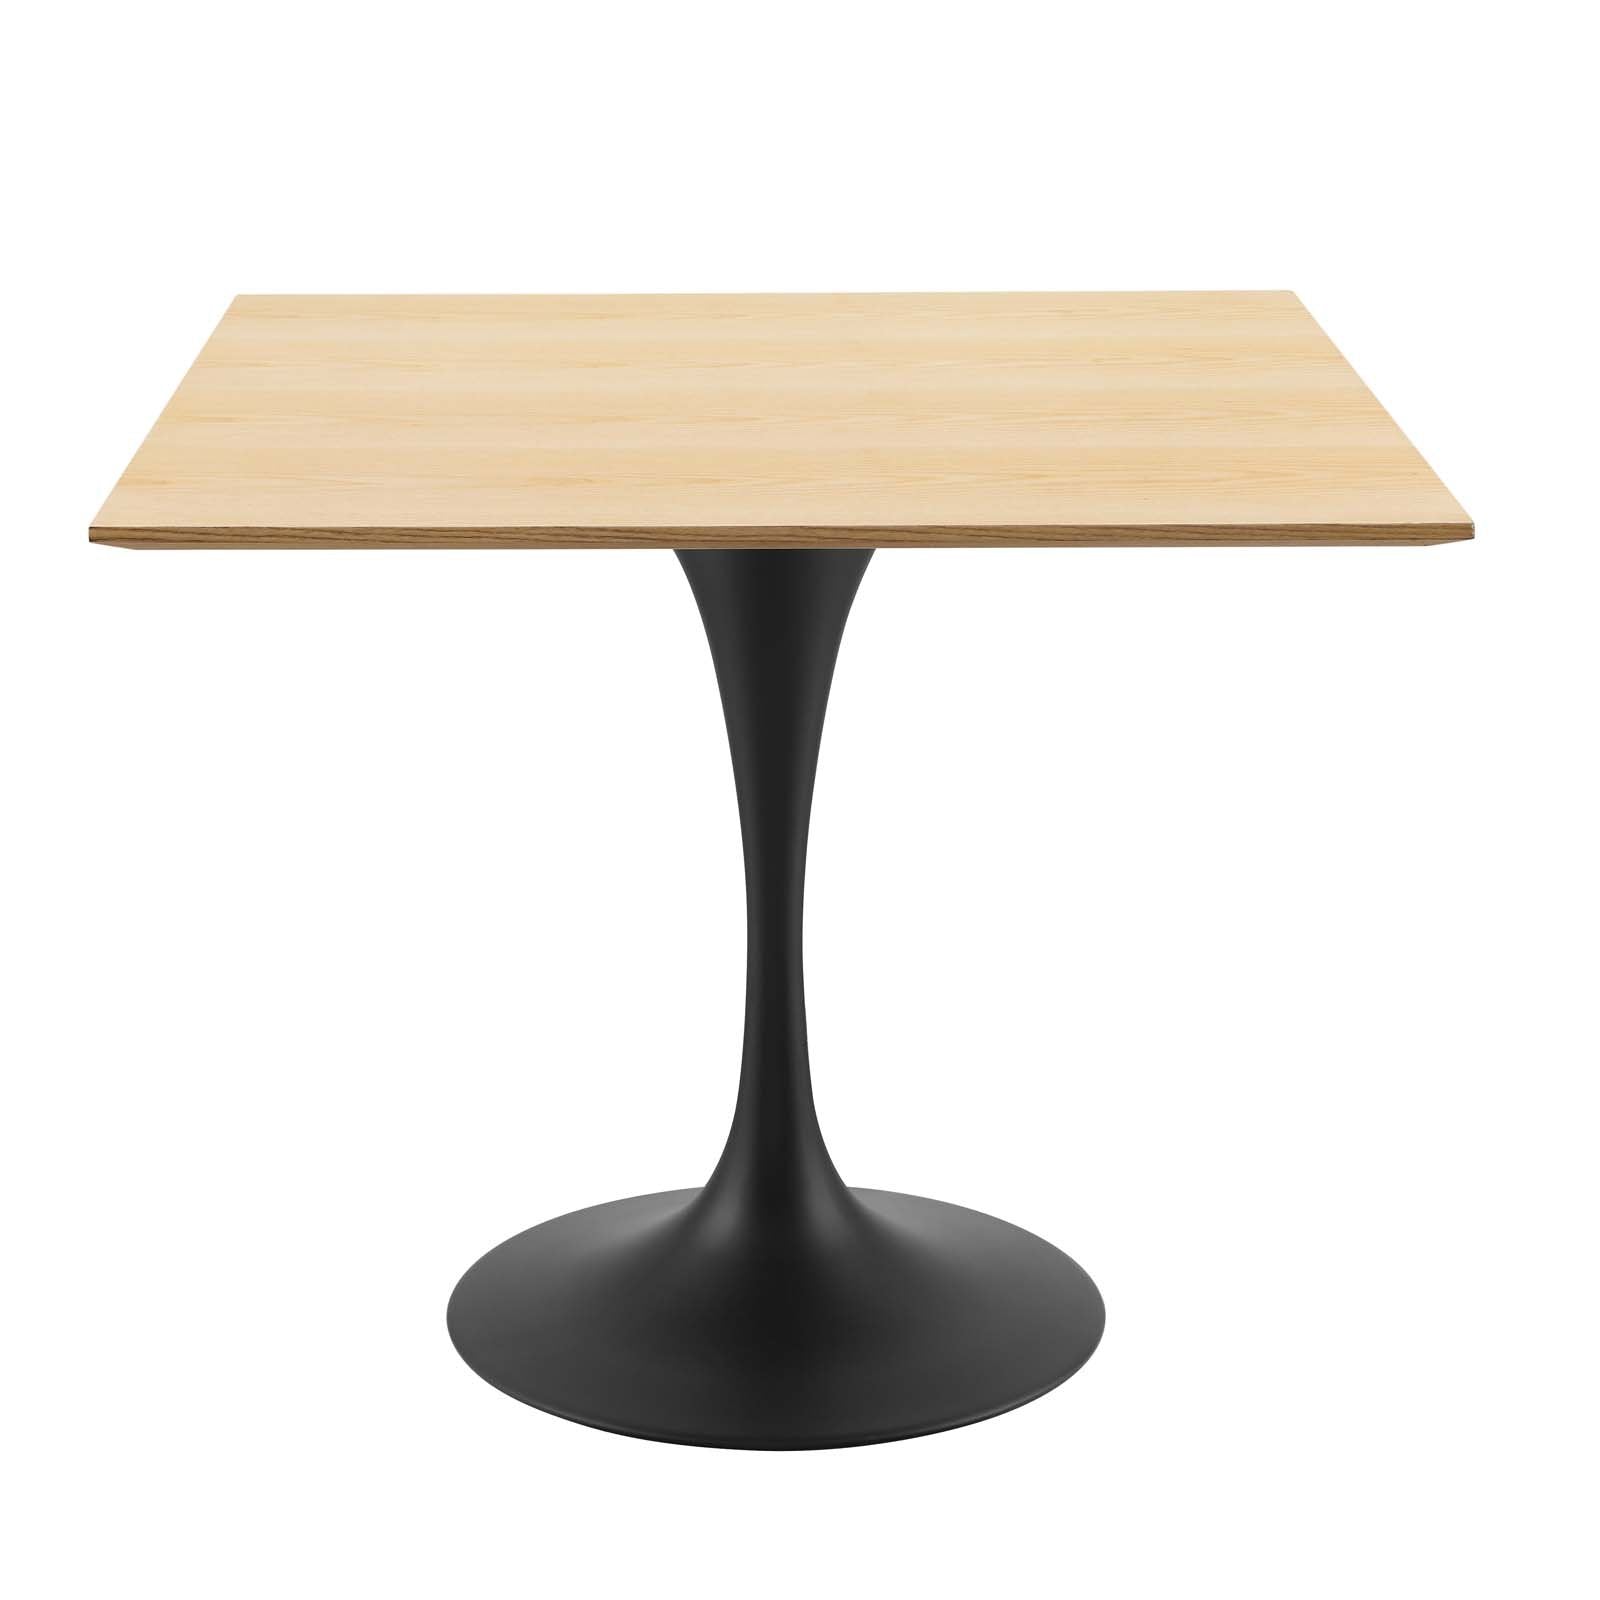 Lippa 36" Wood Square Dining Table - East Shore Modern Home Furnishings